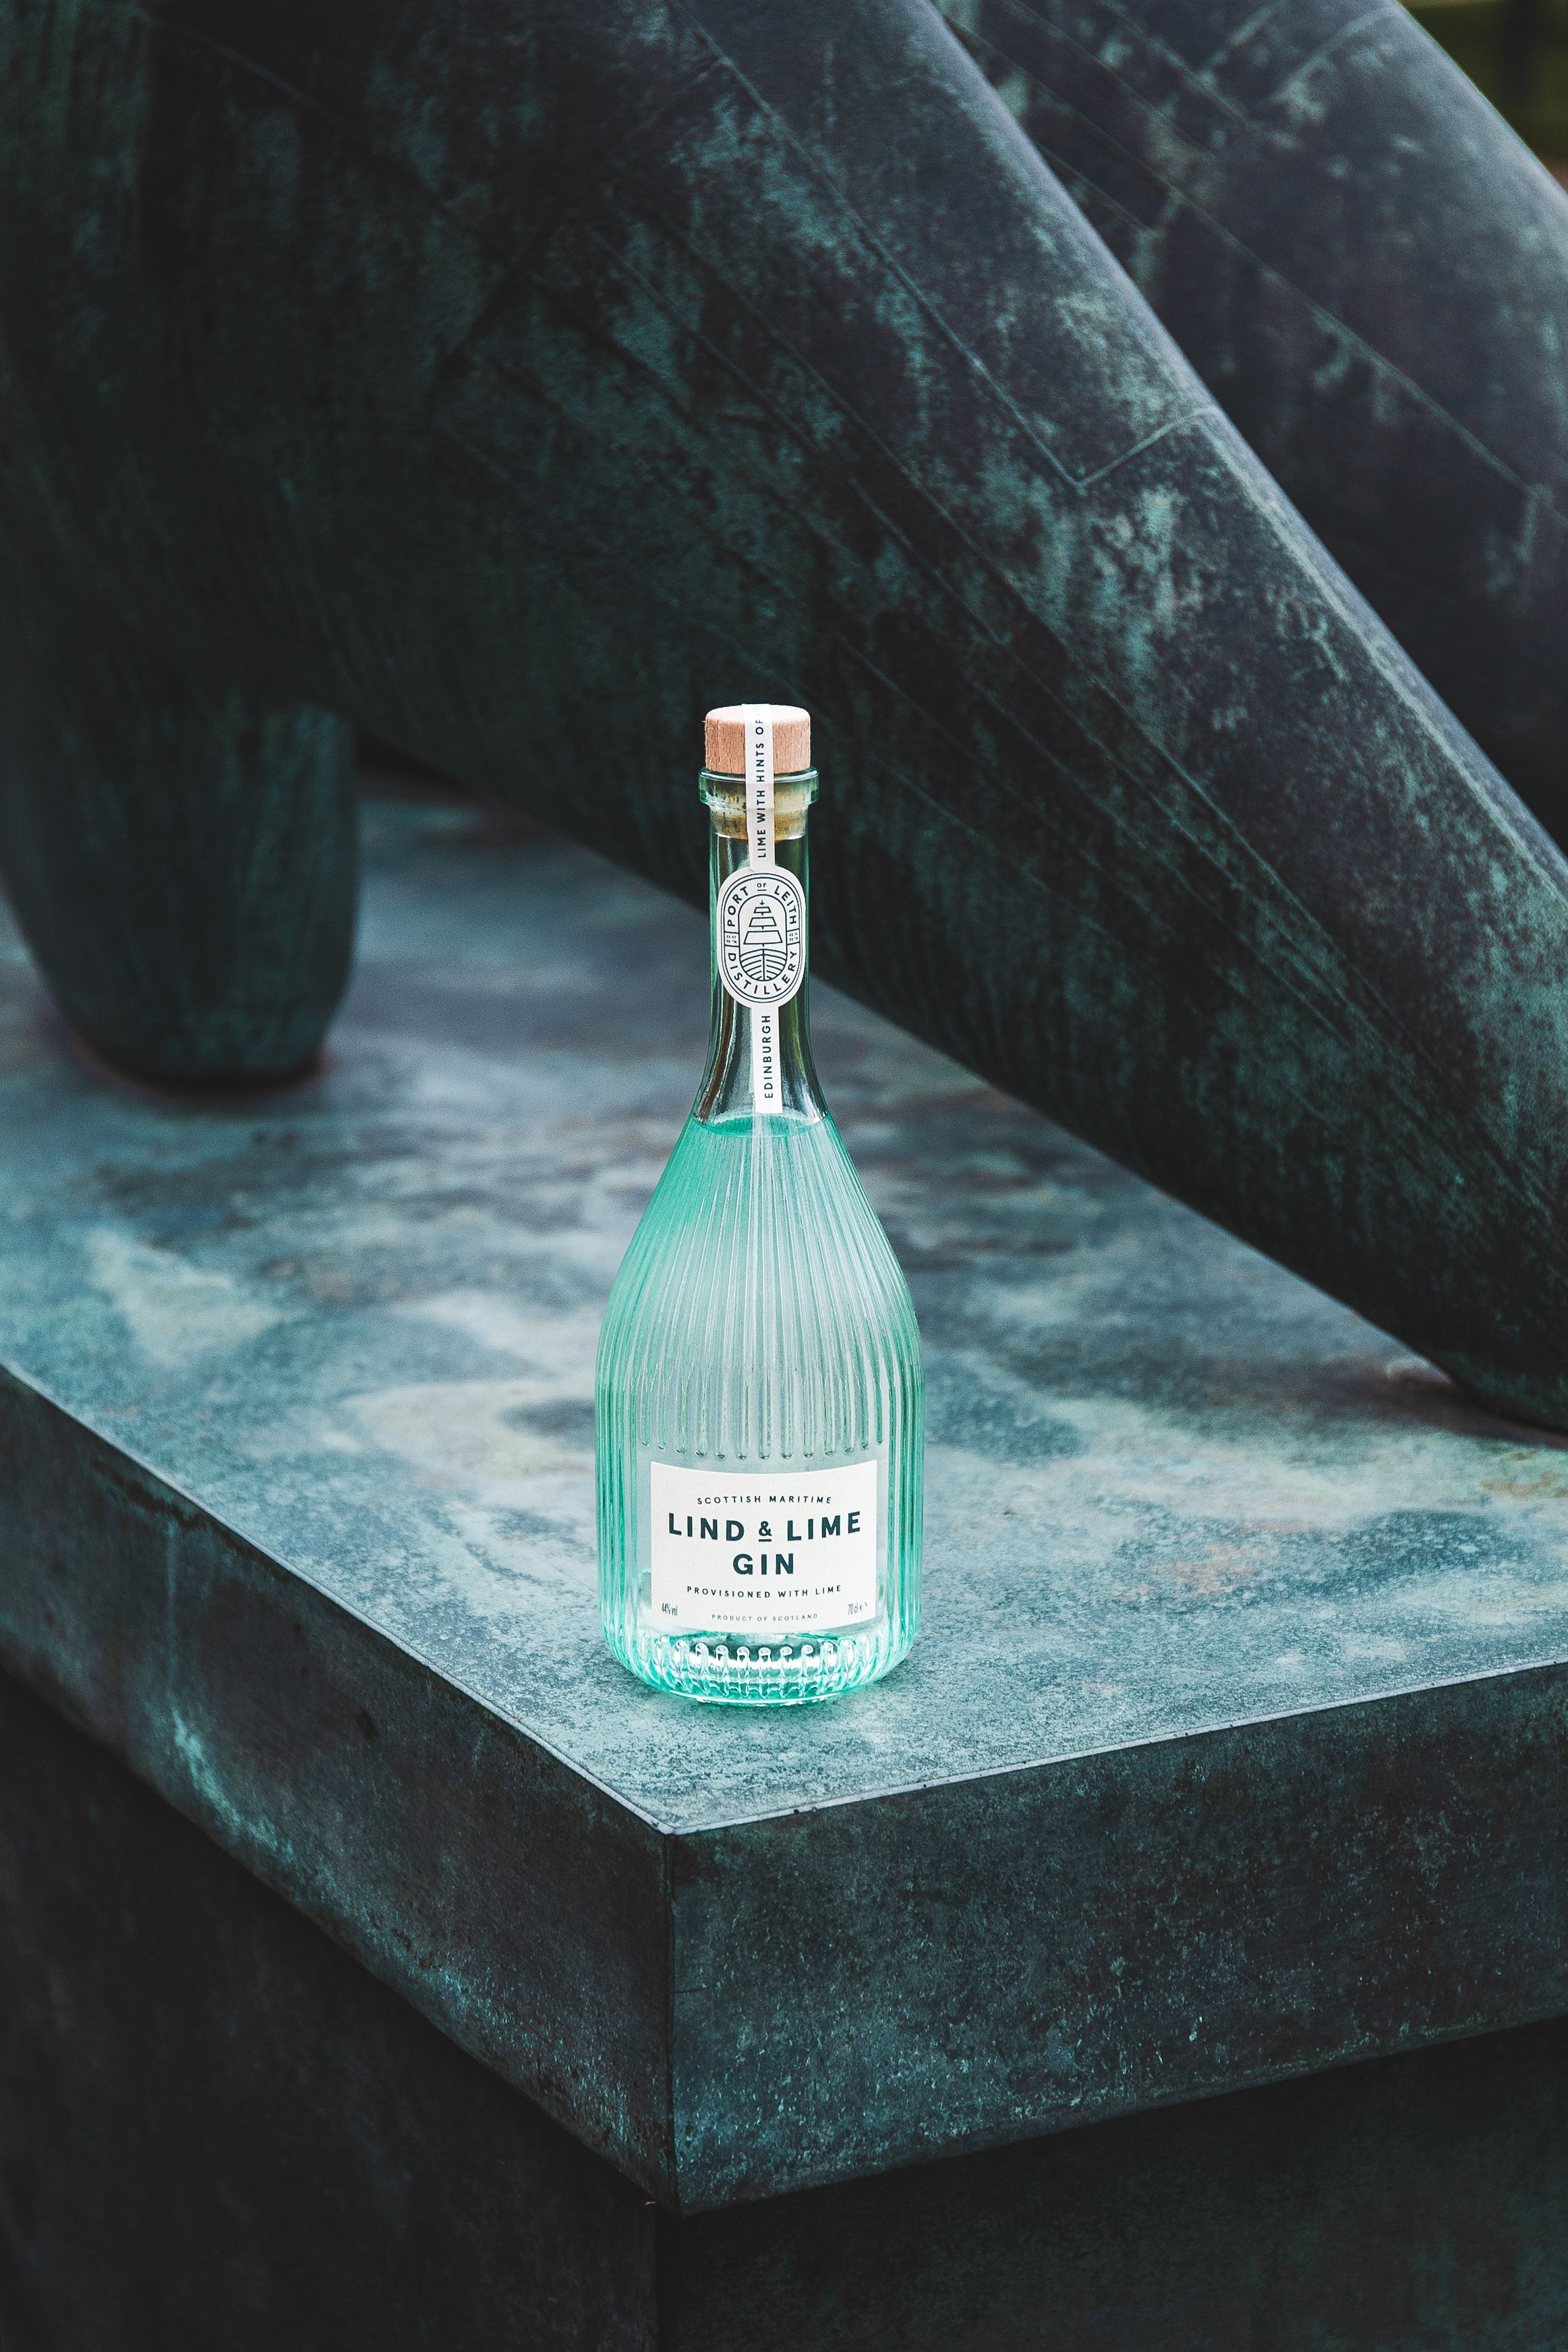 BEHIND THE BRAND | LIND & LIME GIN